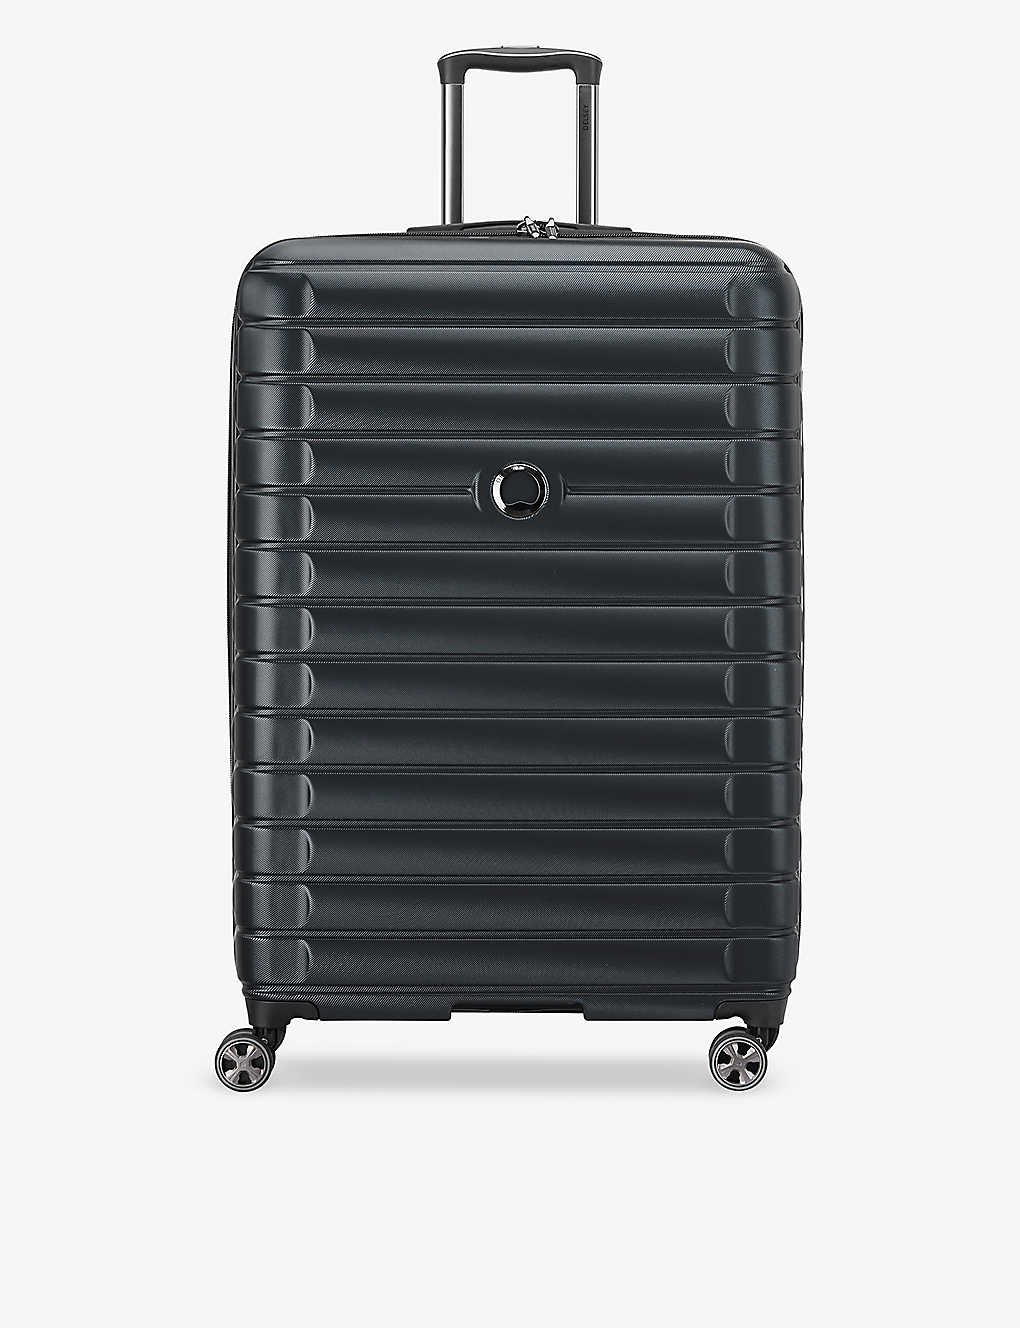 Delsey Black Shadow 5.0 Check-in Suitcase